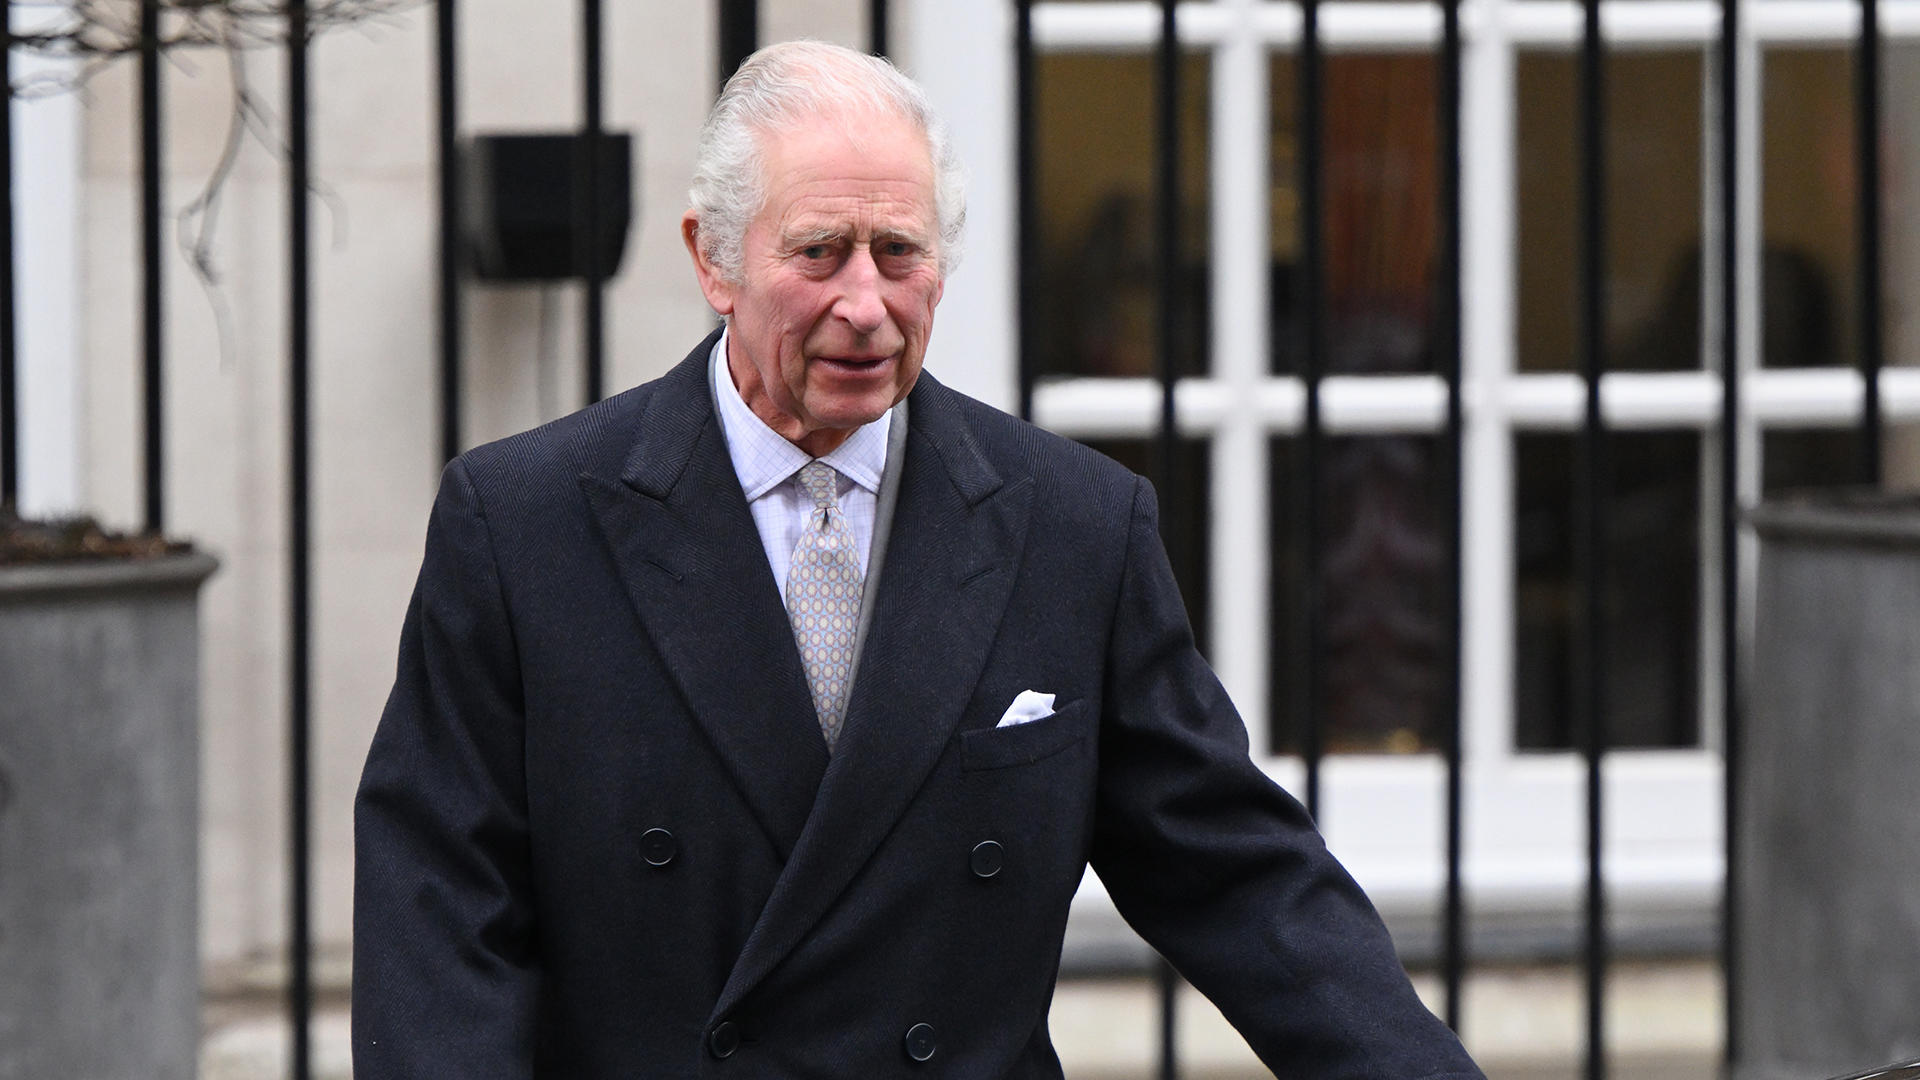 King Charles III discharged from hospital after prostate treatment